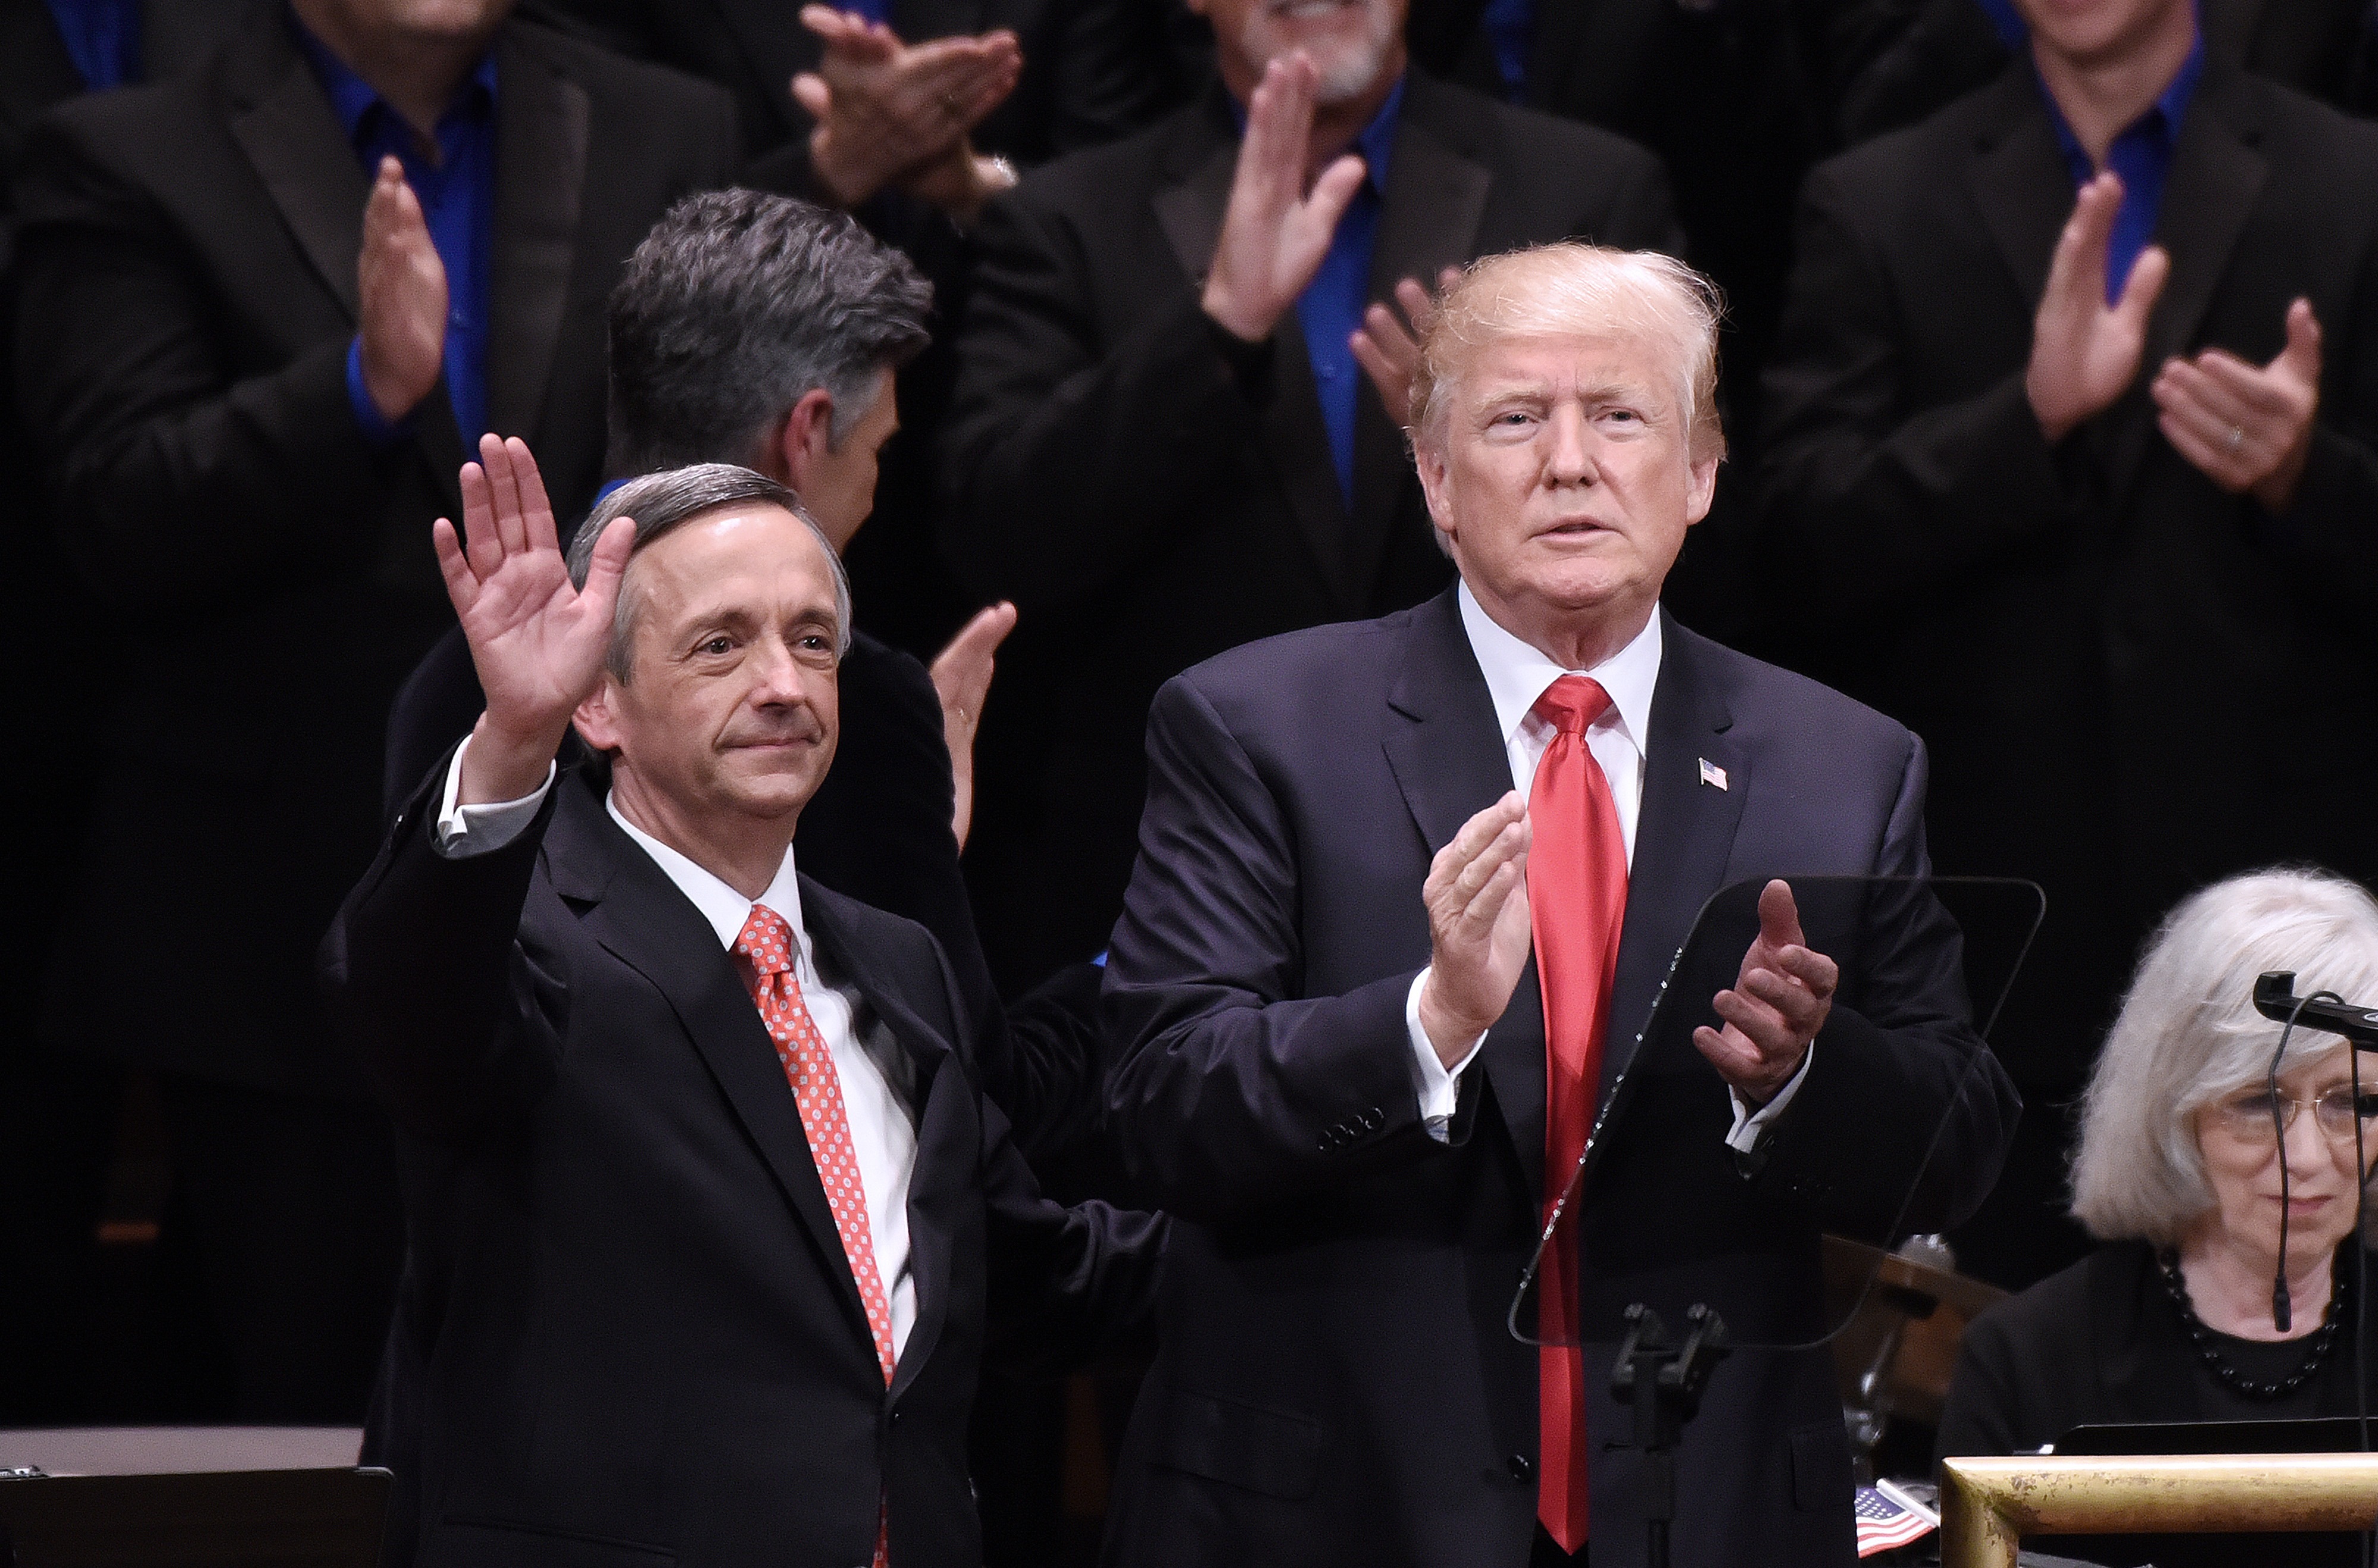 US President Donald Trump and Pastor Robert Jeffress participate in the Celebrate Freedom Rally at the John F. Kennedy Center for the Performing Arts on July 1, 2017 in Washington, DC. (Olivier Douliery-Pool via Getty Images)